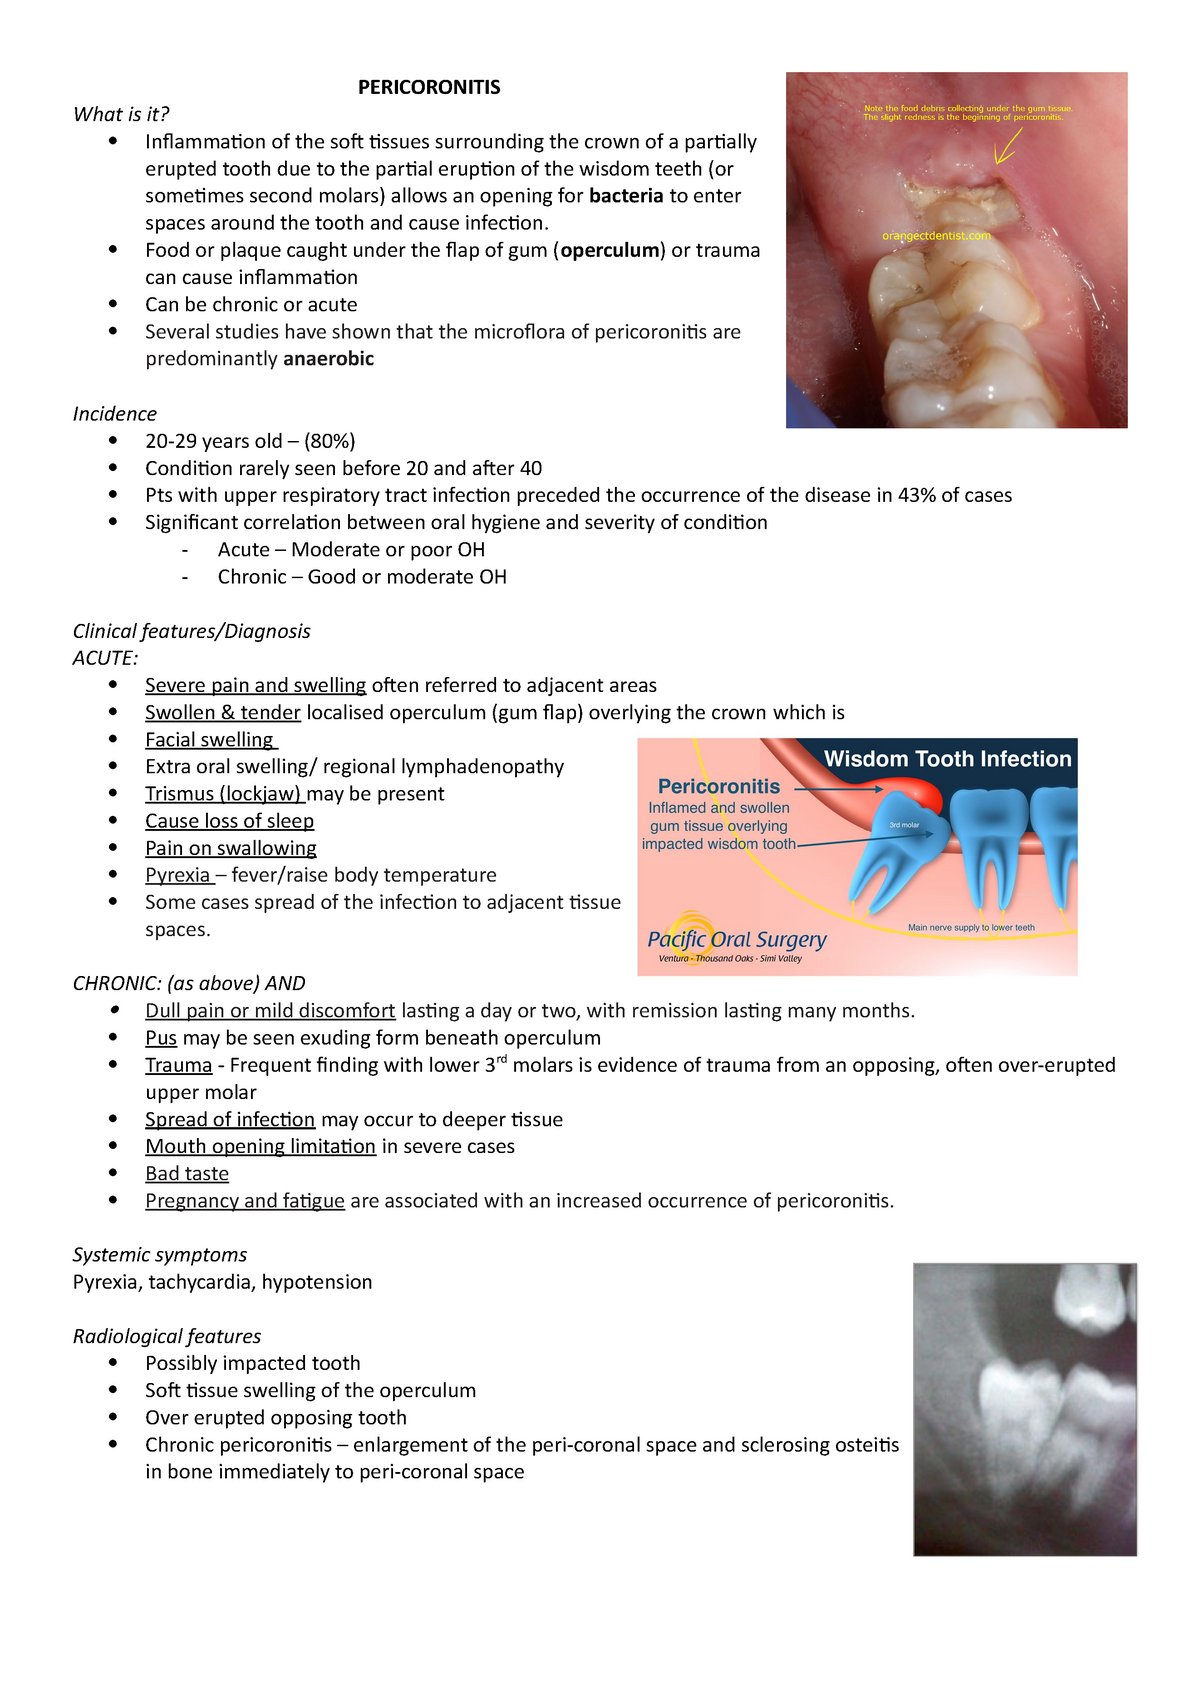 [P] Pericoronitis Notes - PERICORONITIS What is it? Inflammation of the ...